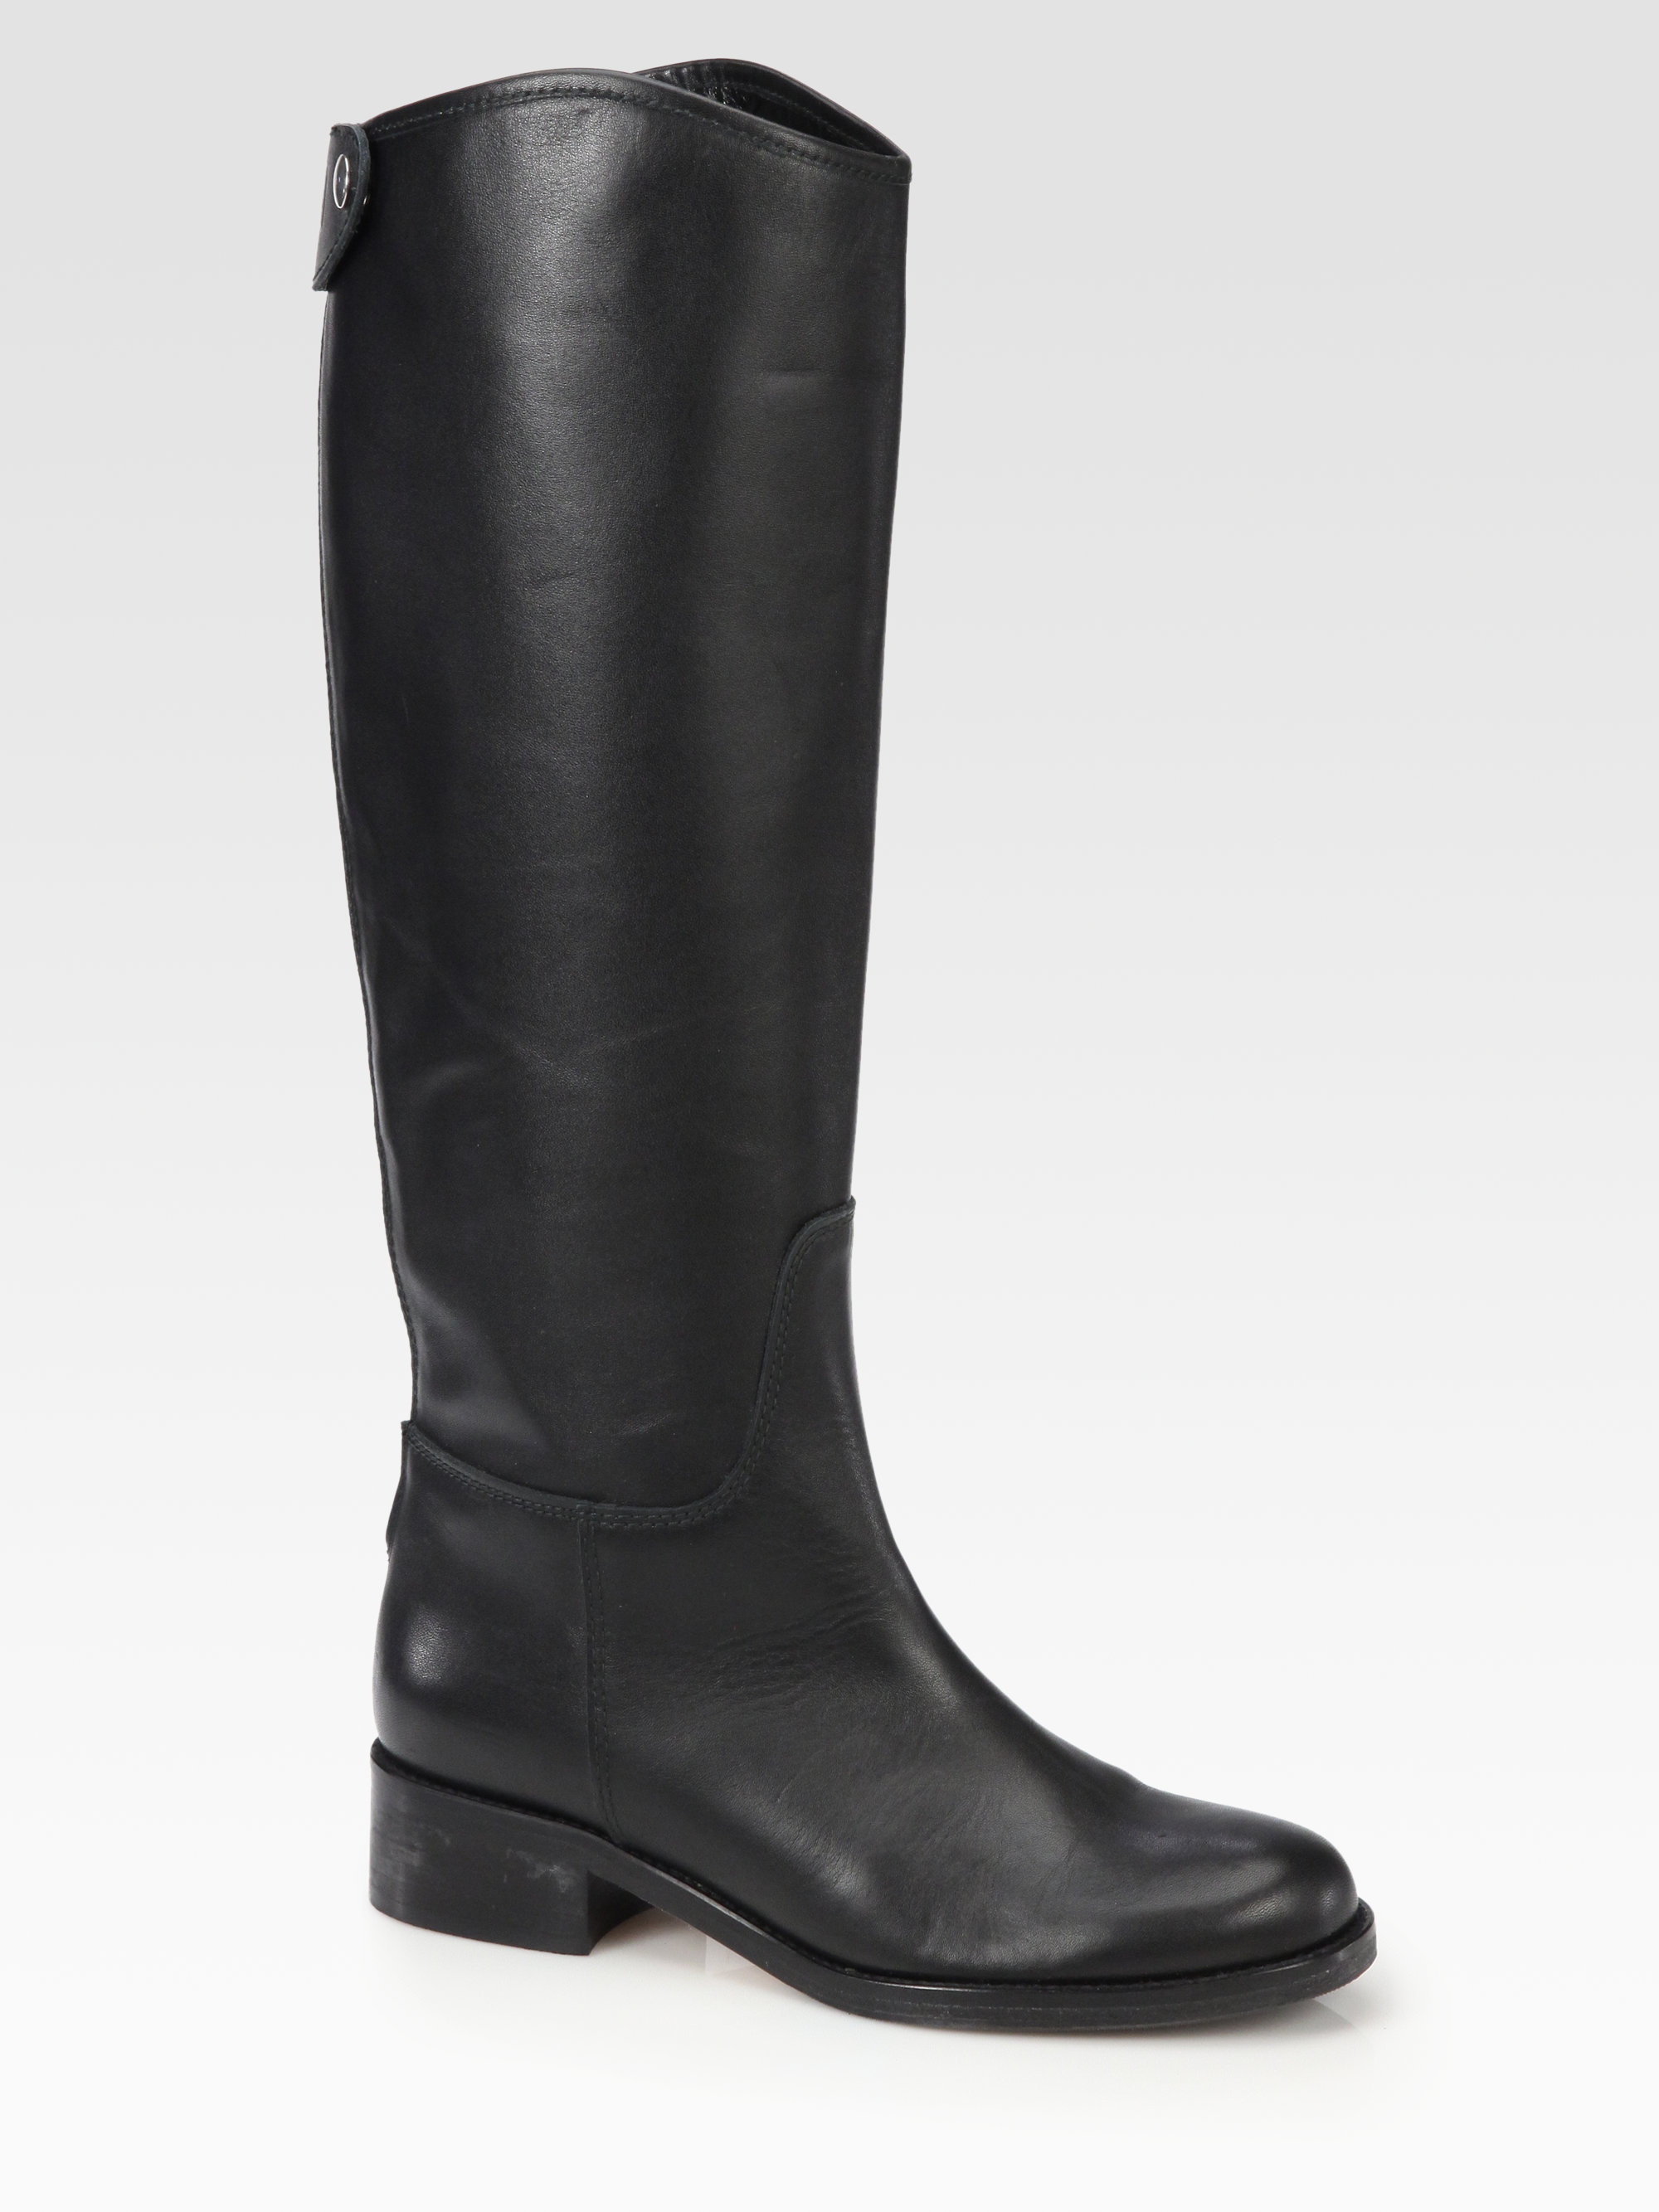 HUNTER Leather Kneehigh Riding Boots in Black - Lyst